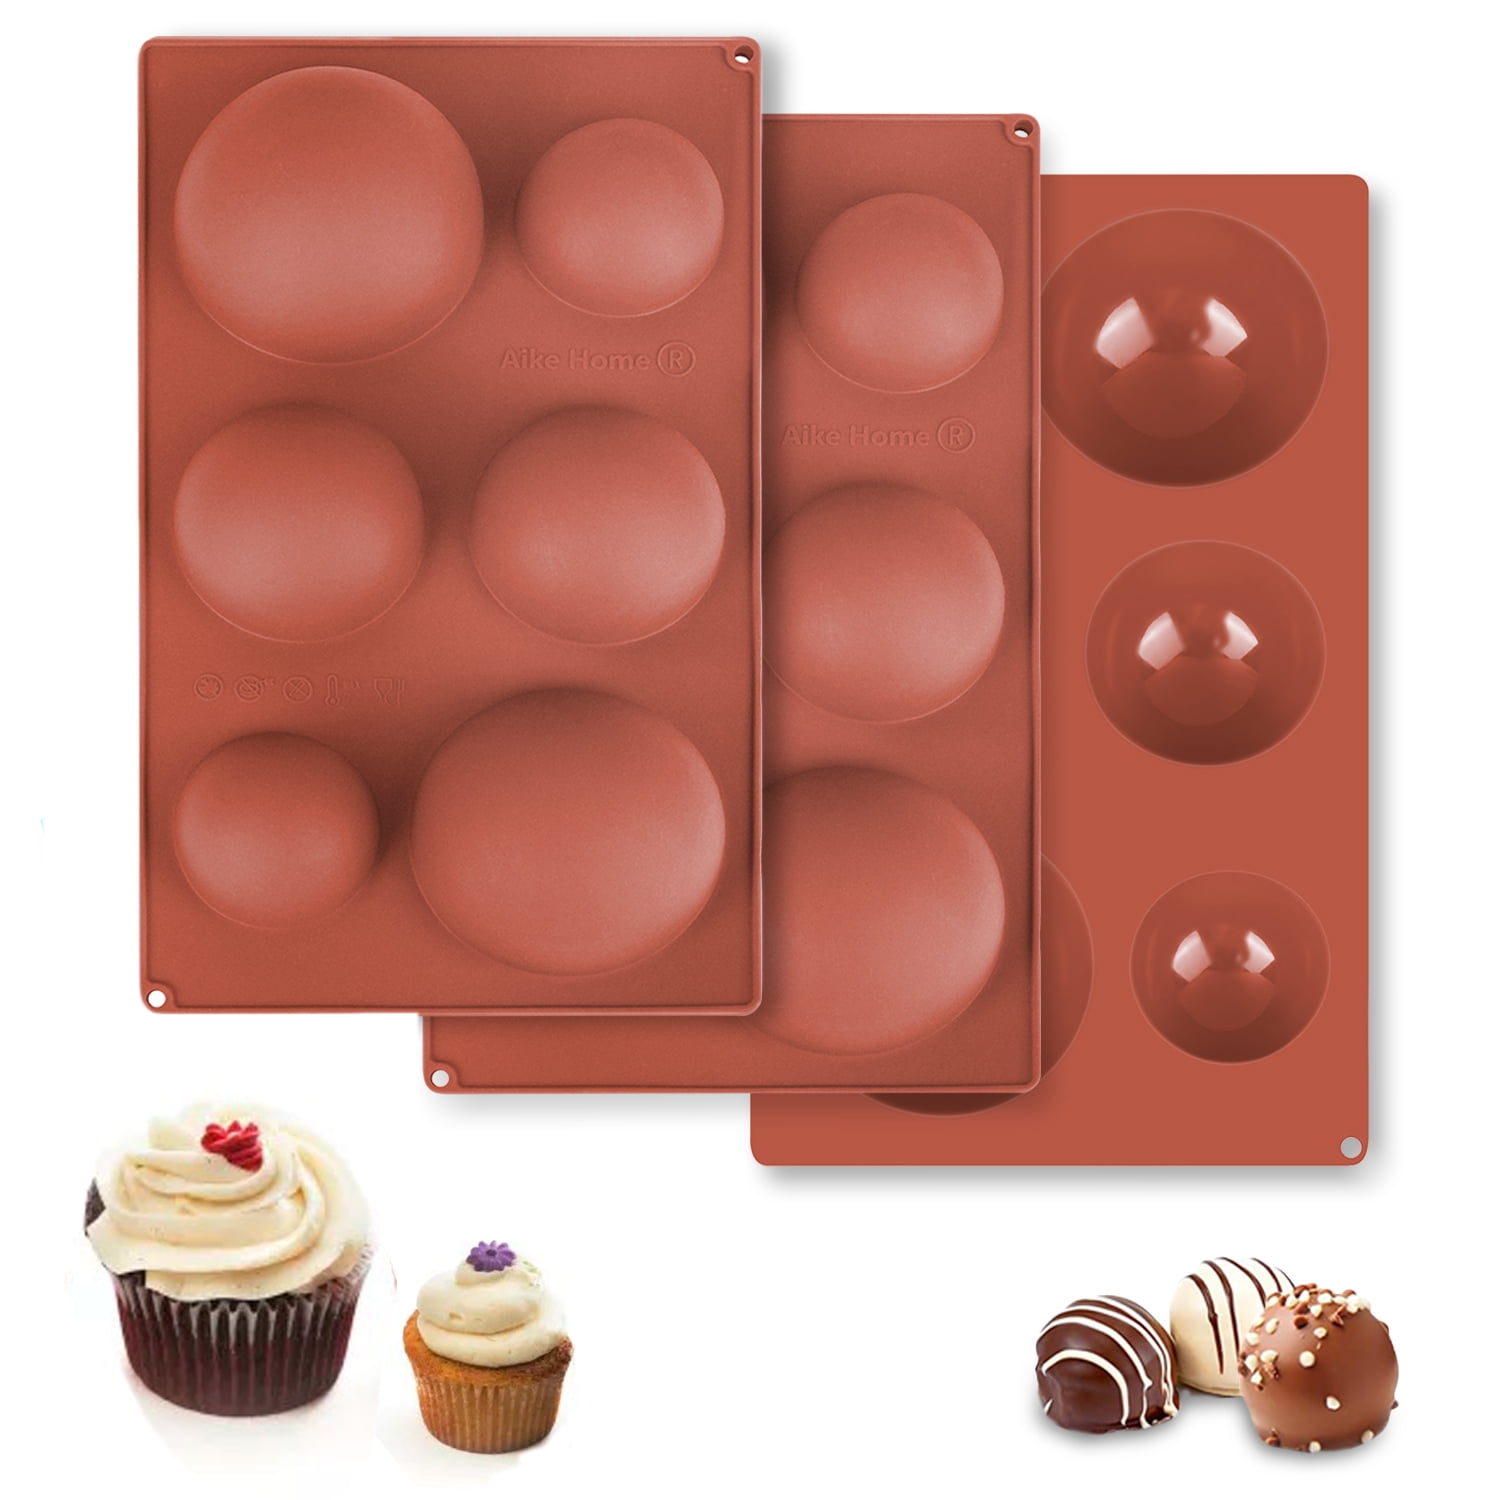 2Pcs 3D Half Ball 6 Cell Silicone Chocolate Mold Sphere Cupcake Cake Baking Mold 